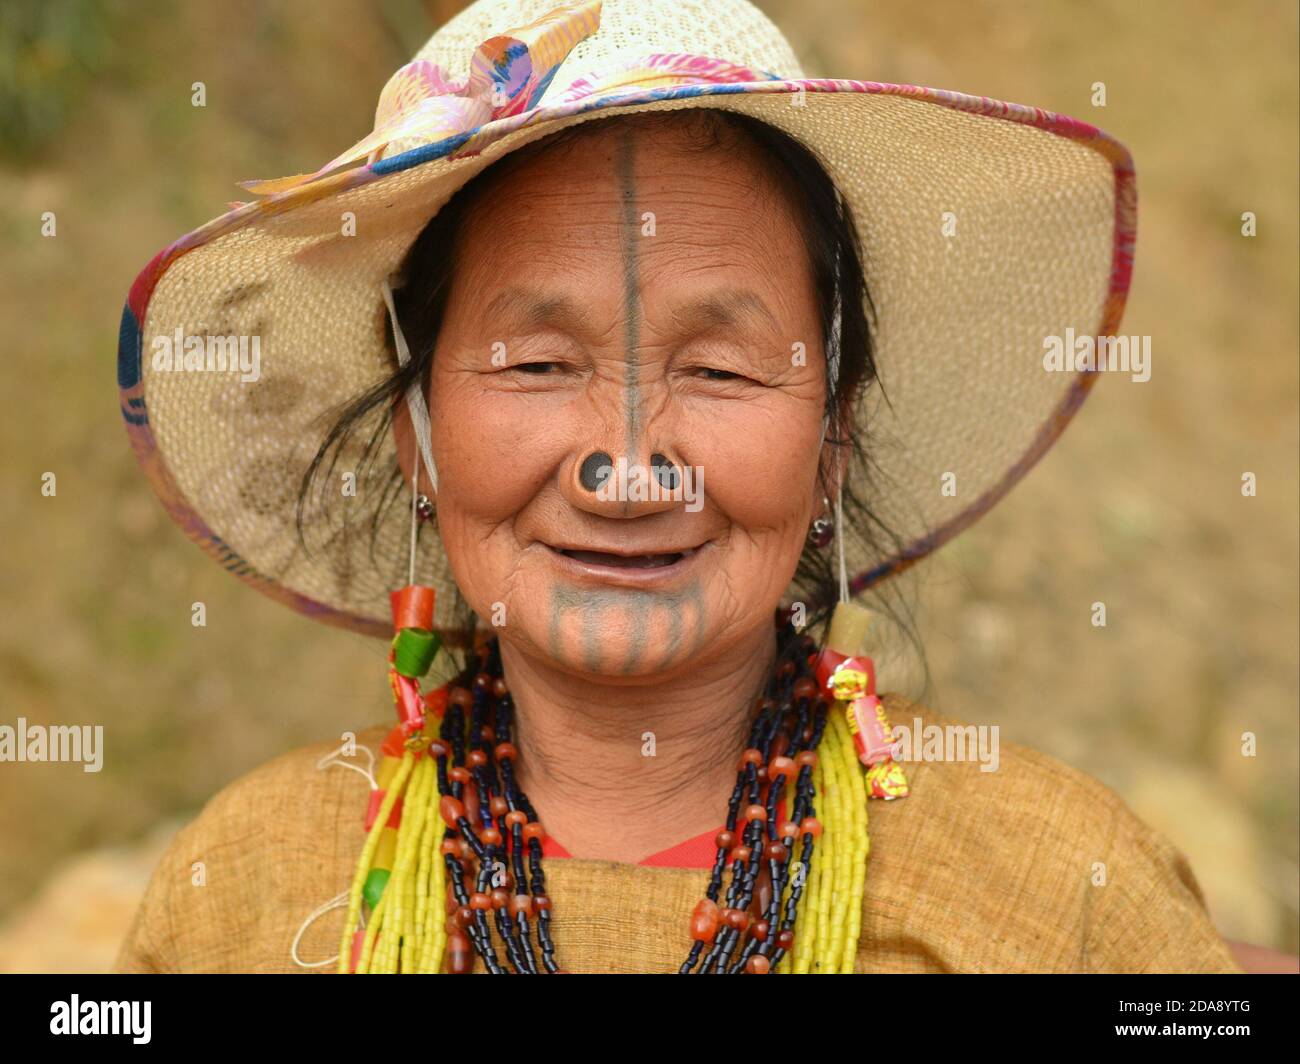 Elderly Northeast Indian Apatani tribal woman with black nose plugs and traditional face tattoos wears a modern sun hat and smiles for the camera. Stock Photo